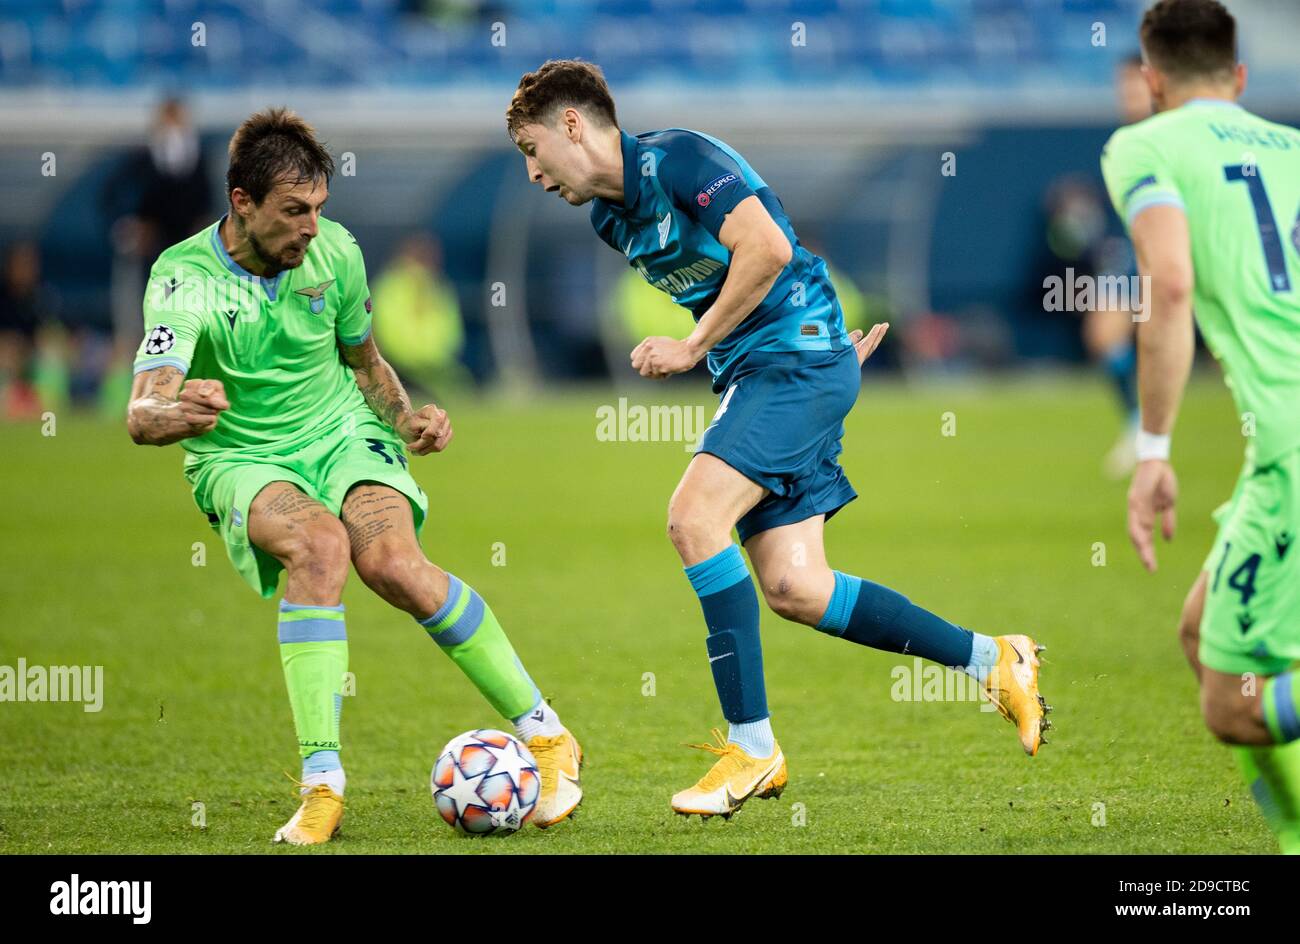 SAINT PETERSBURG, RUSSIA - NOVEMBER 04: Daler Kuzyayev of Zenit St Petersburg beats Franceso Acerbi of SS Lazio during the UEFA Champions League Group F stage match between Zenit St. Petersburg and SS Lazio at Gazprom Arena on November 4, 2020 in Saint Petersburg, Russia. (Photo by MB Media) Stock Photo